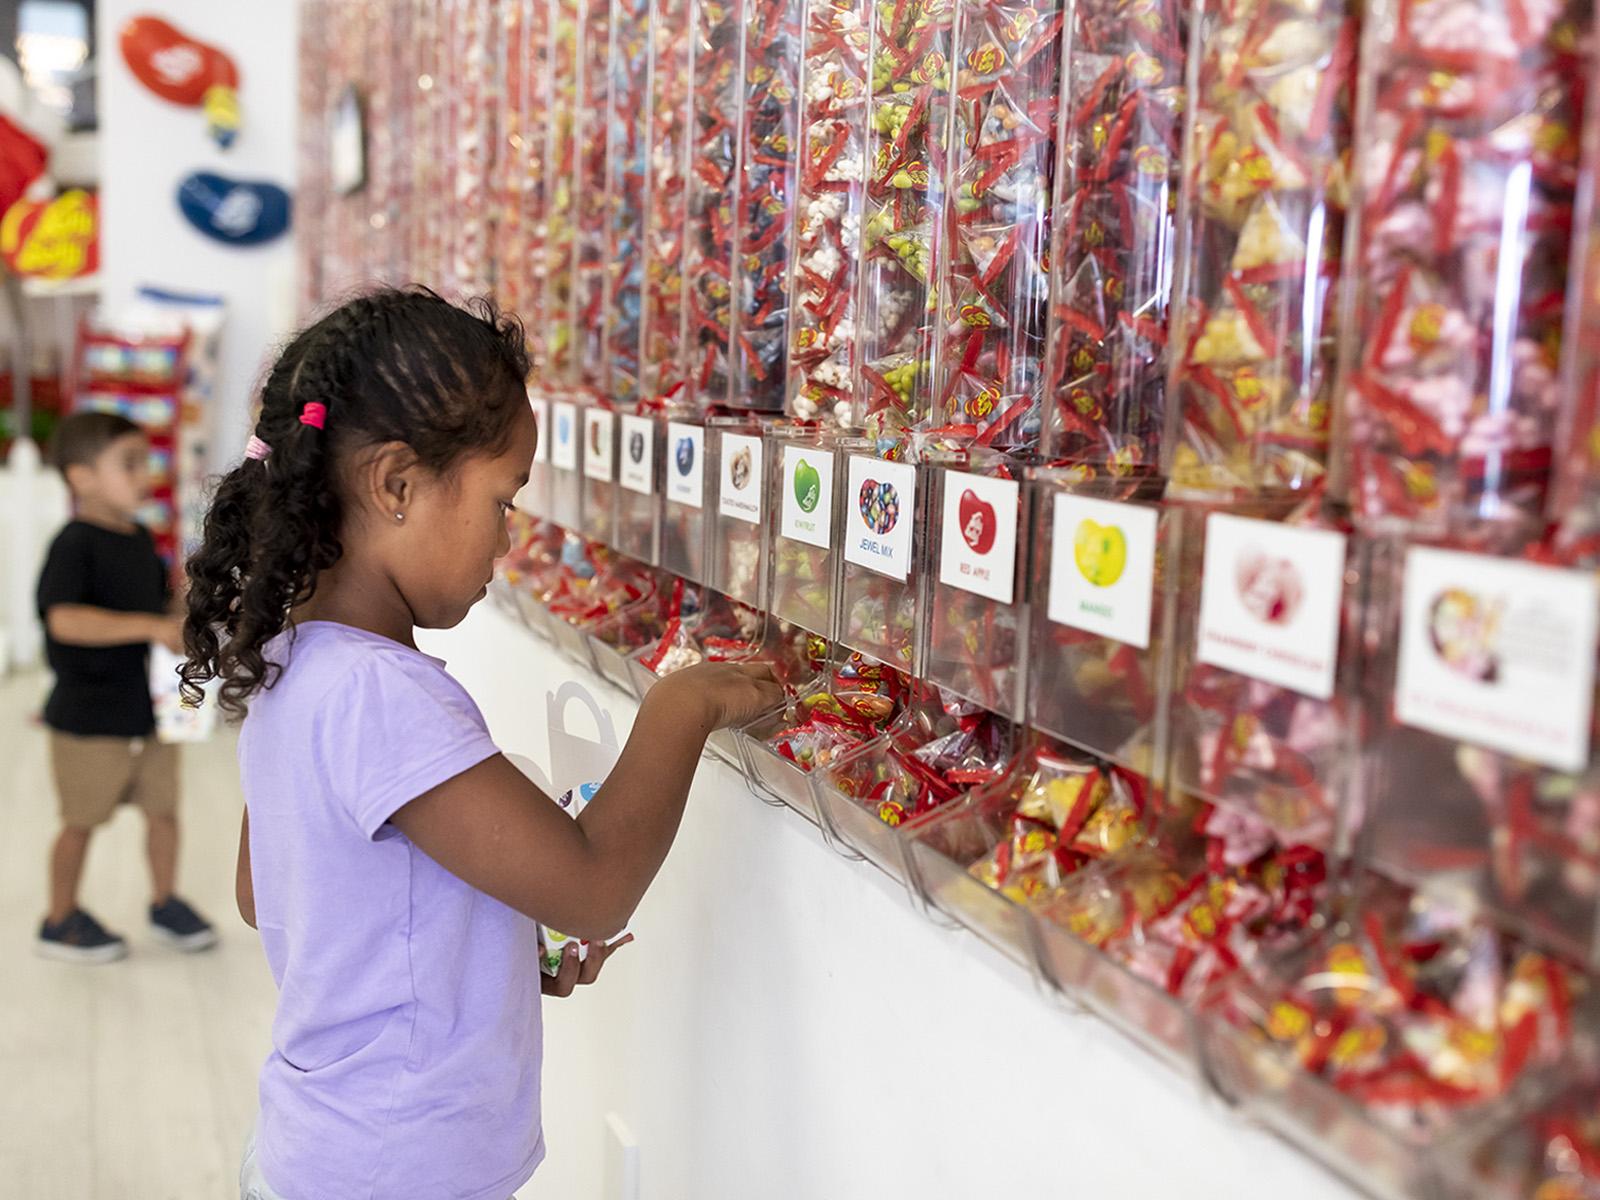 Image of a girl in a sweet store choosing jelly beans